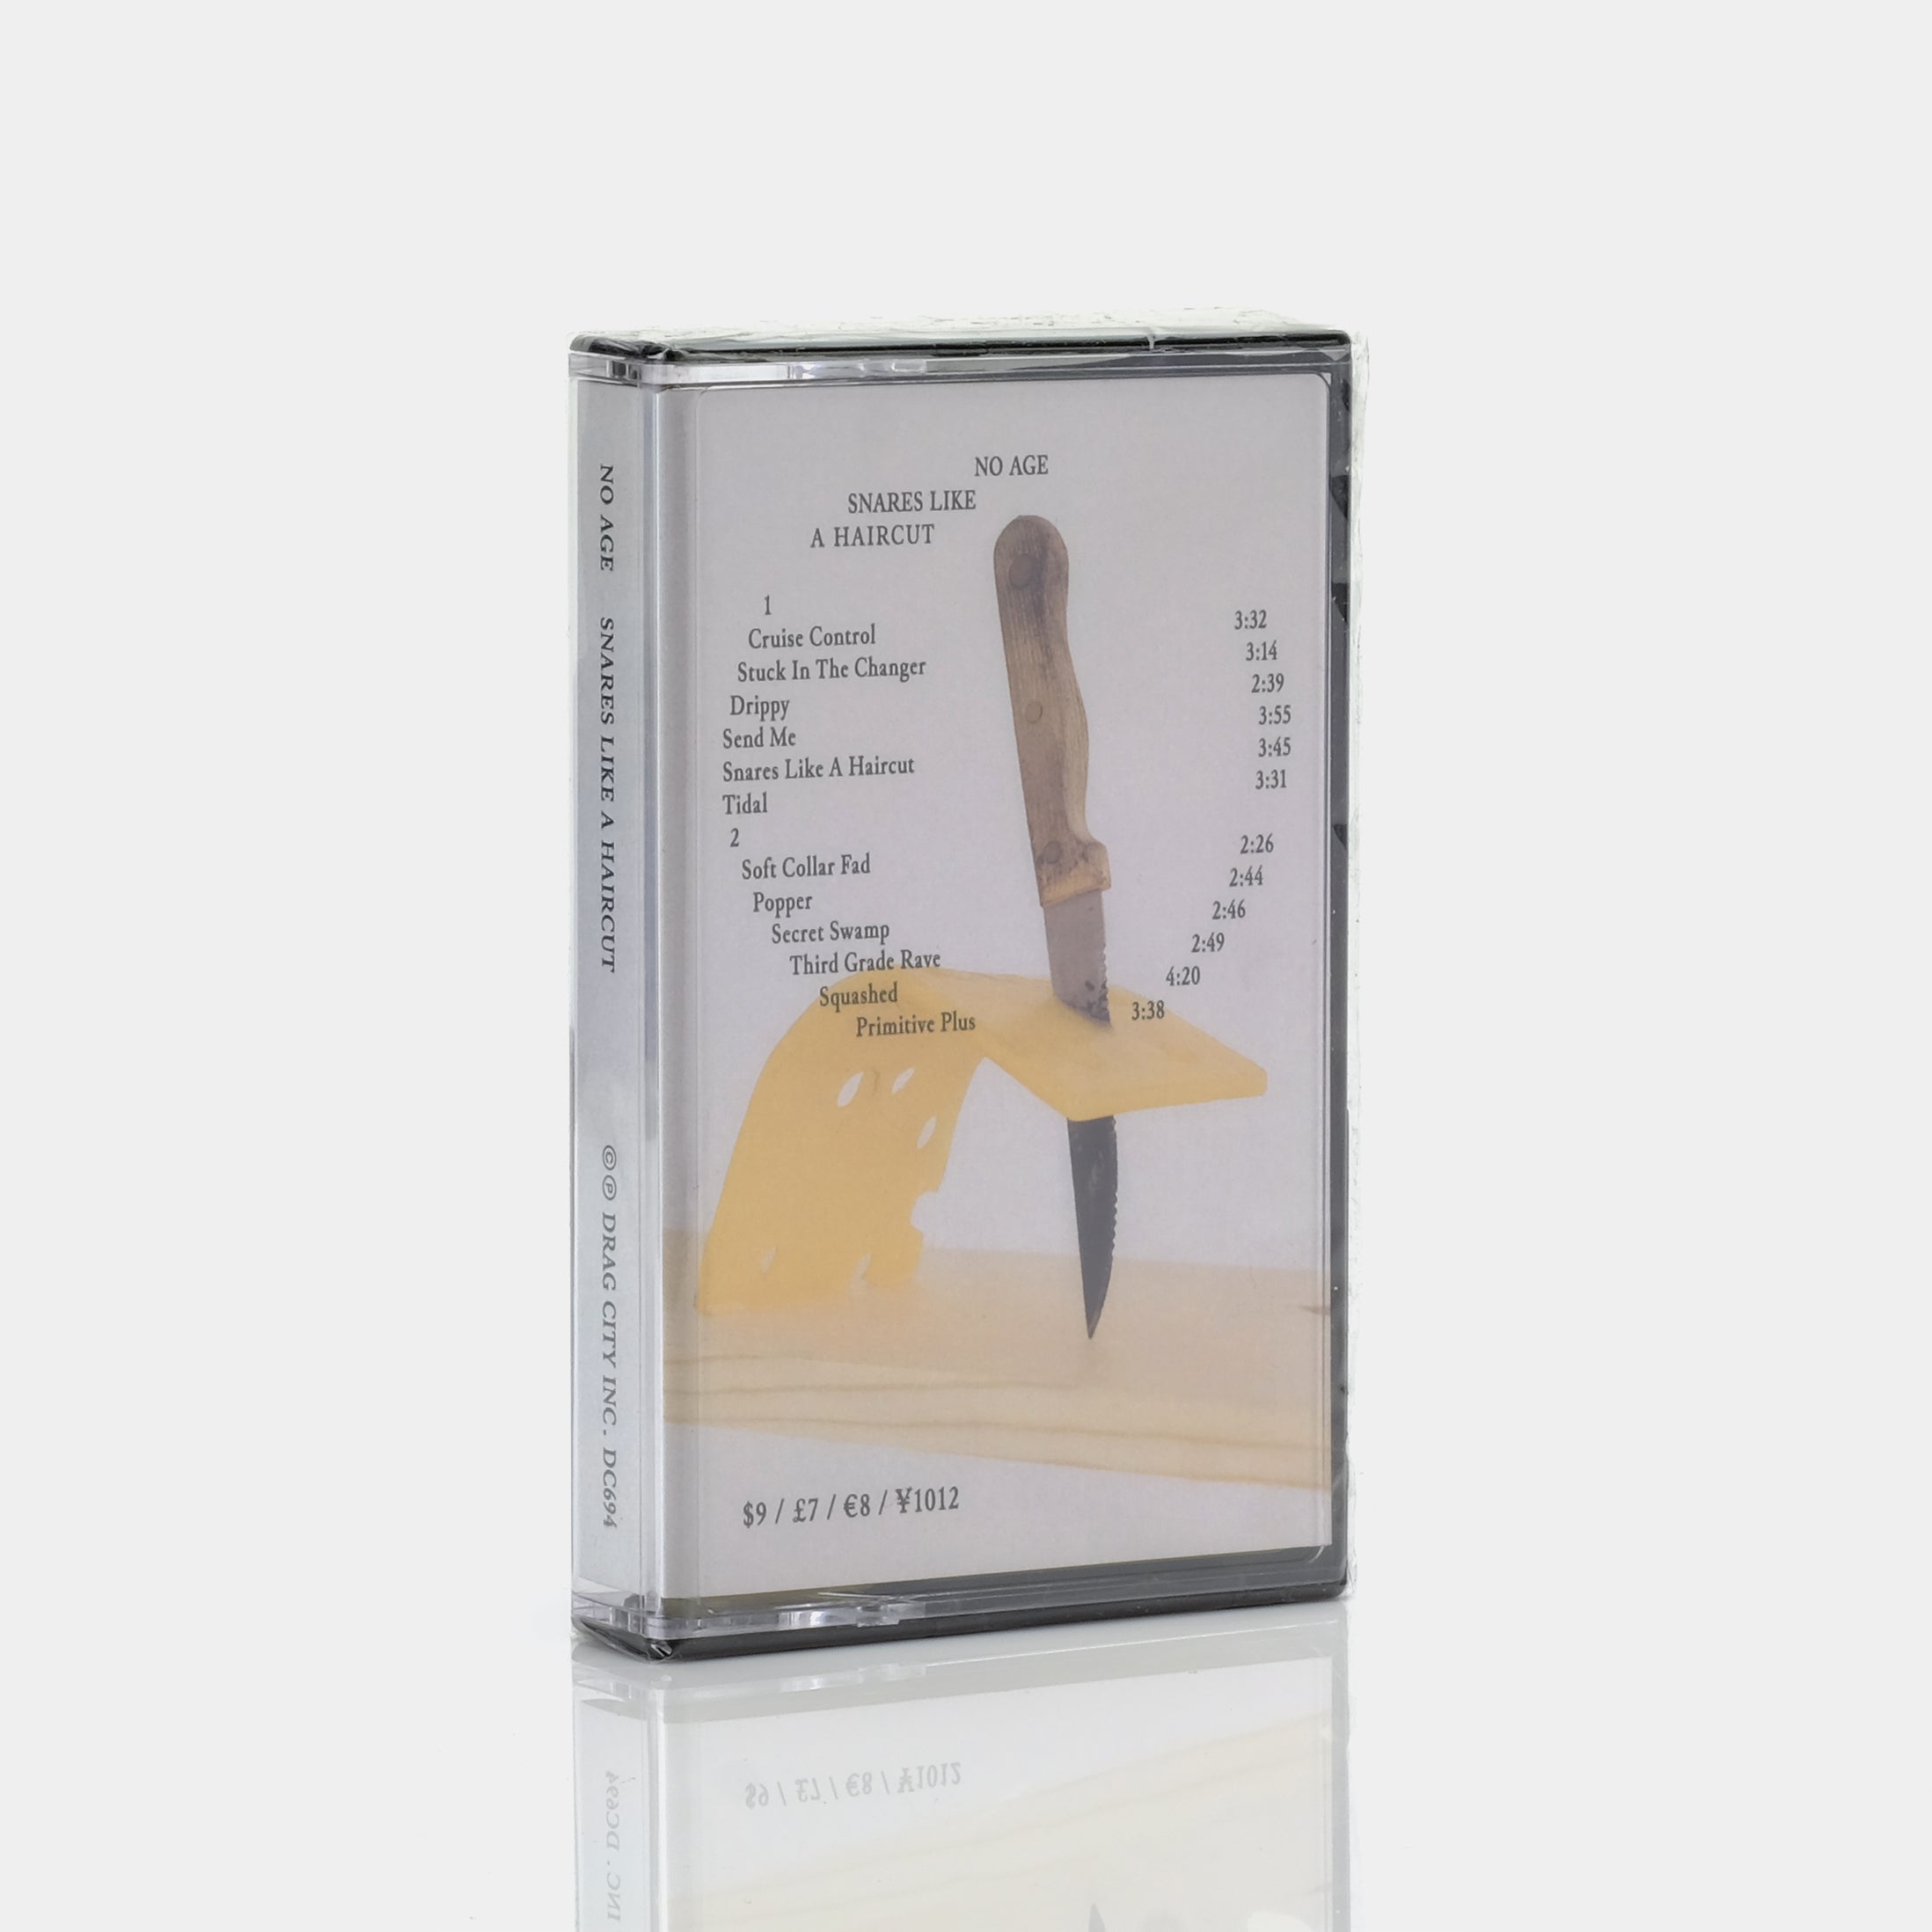 No Age - Snares Like A Haircut Cassette Tape